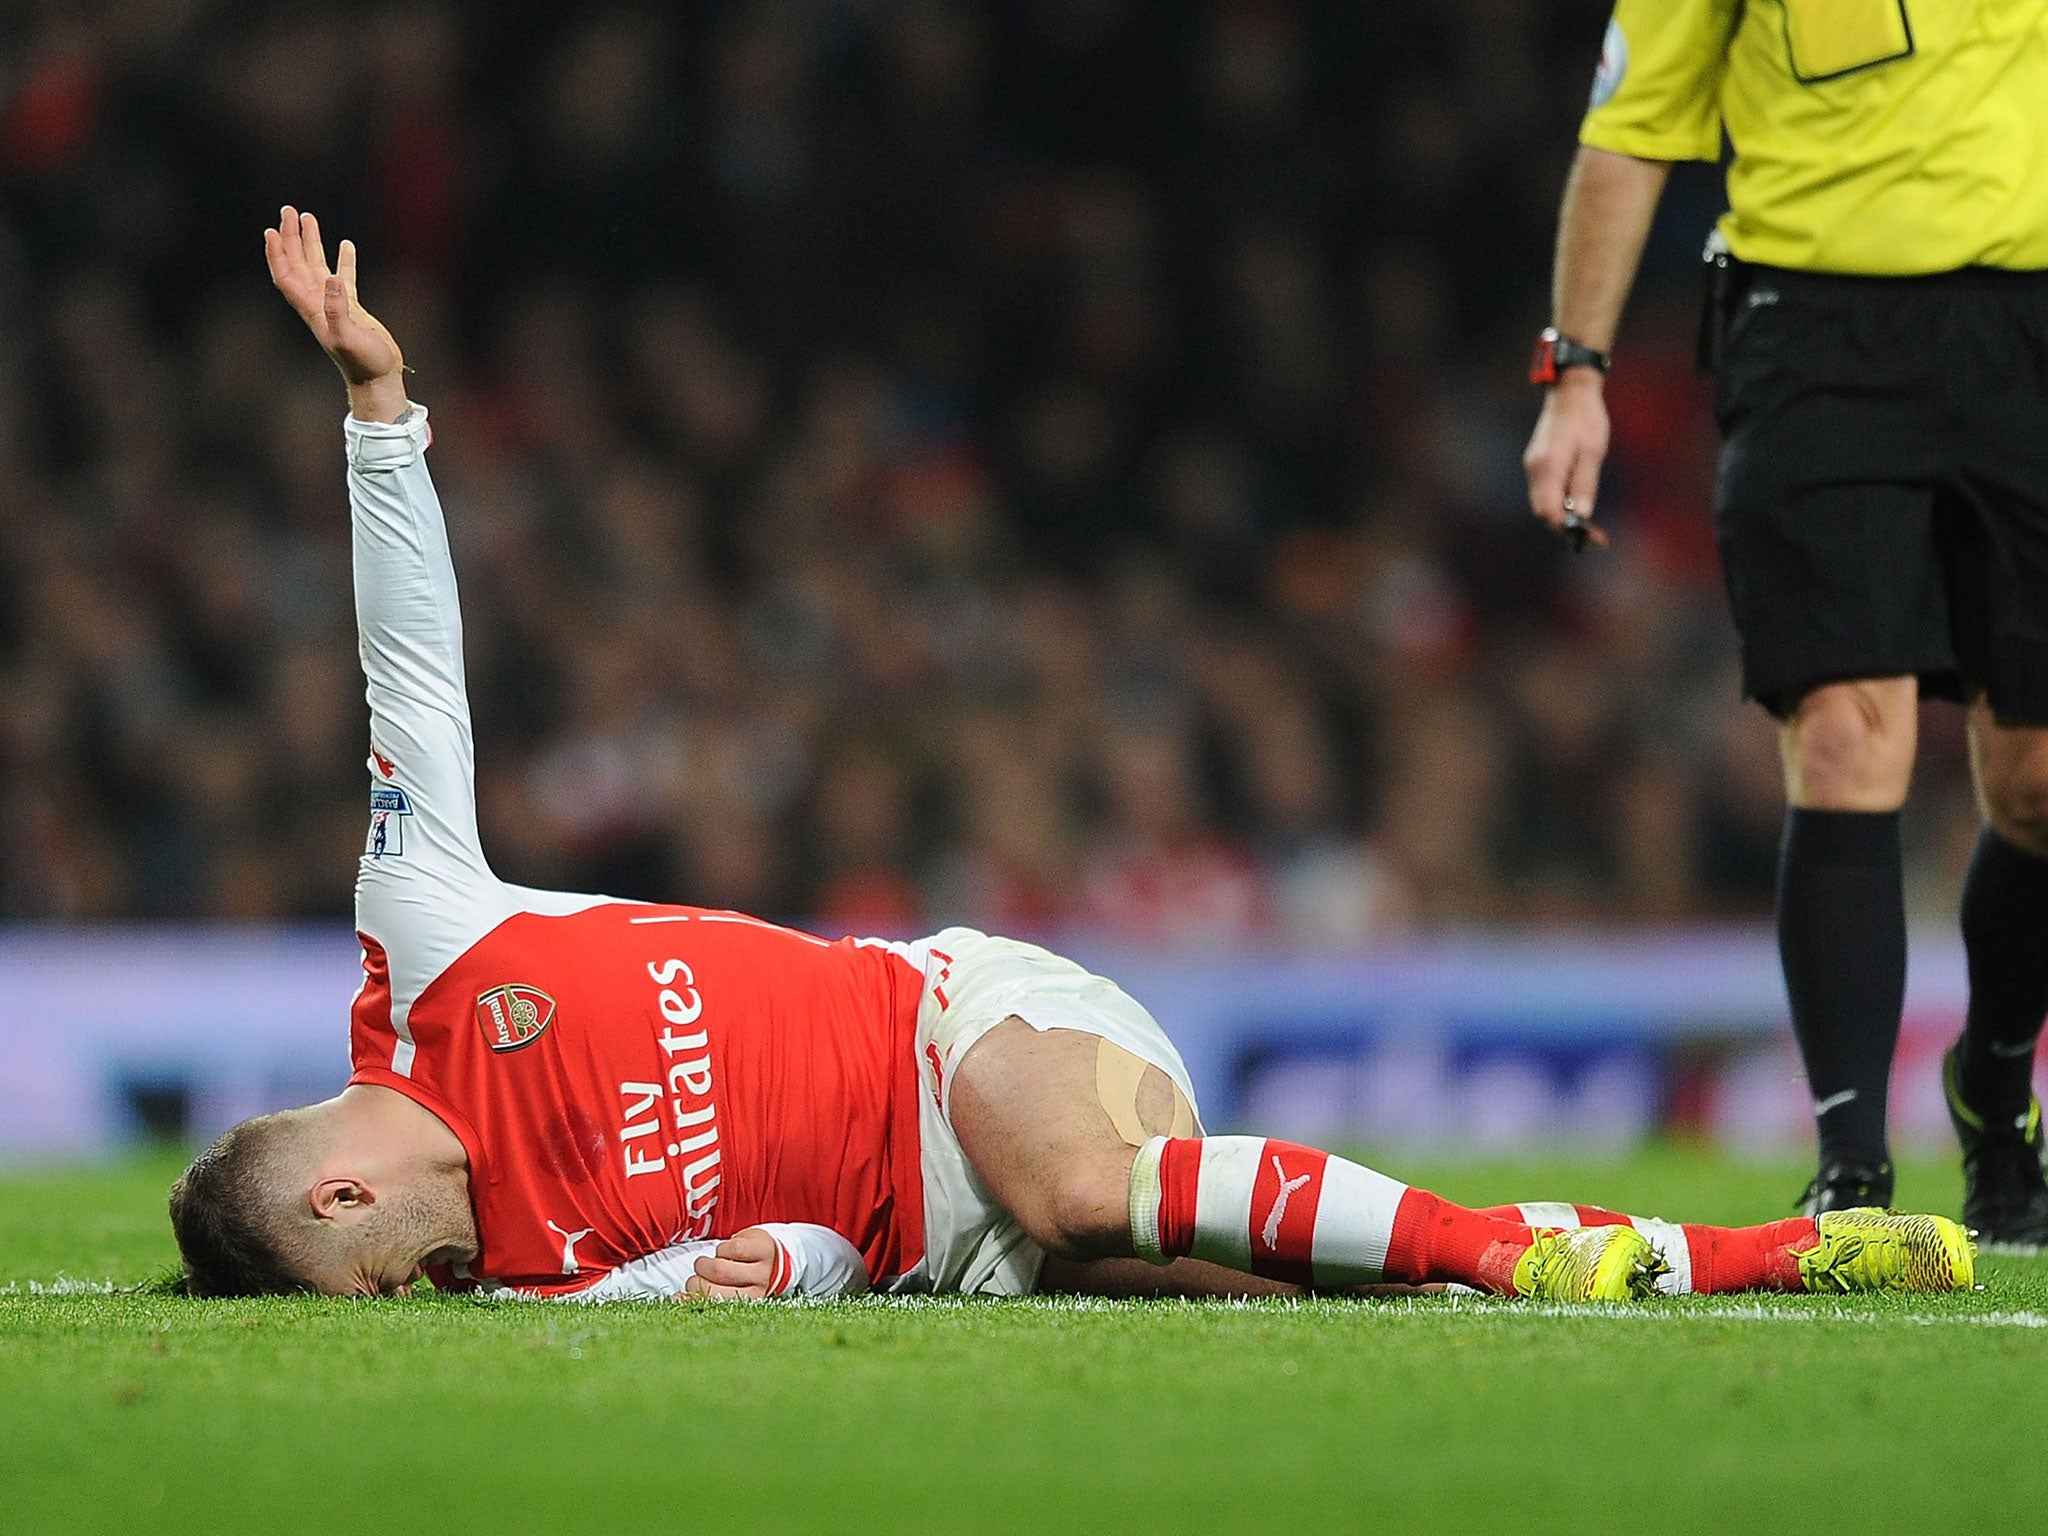 Jack Wilshere calls for medical help after suffering an ankle injury